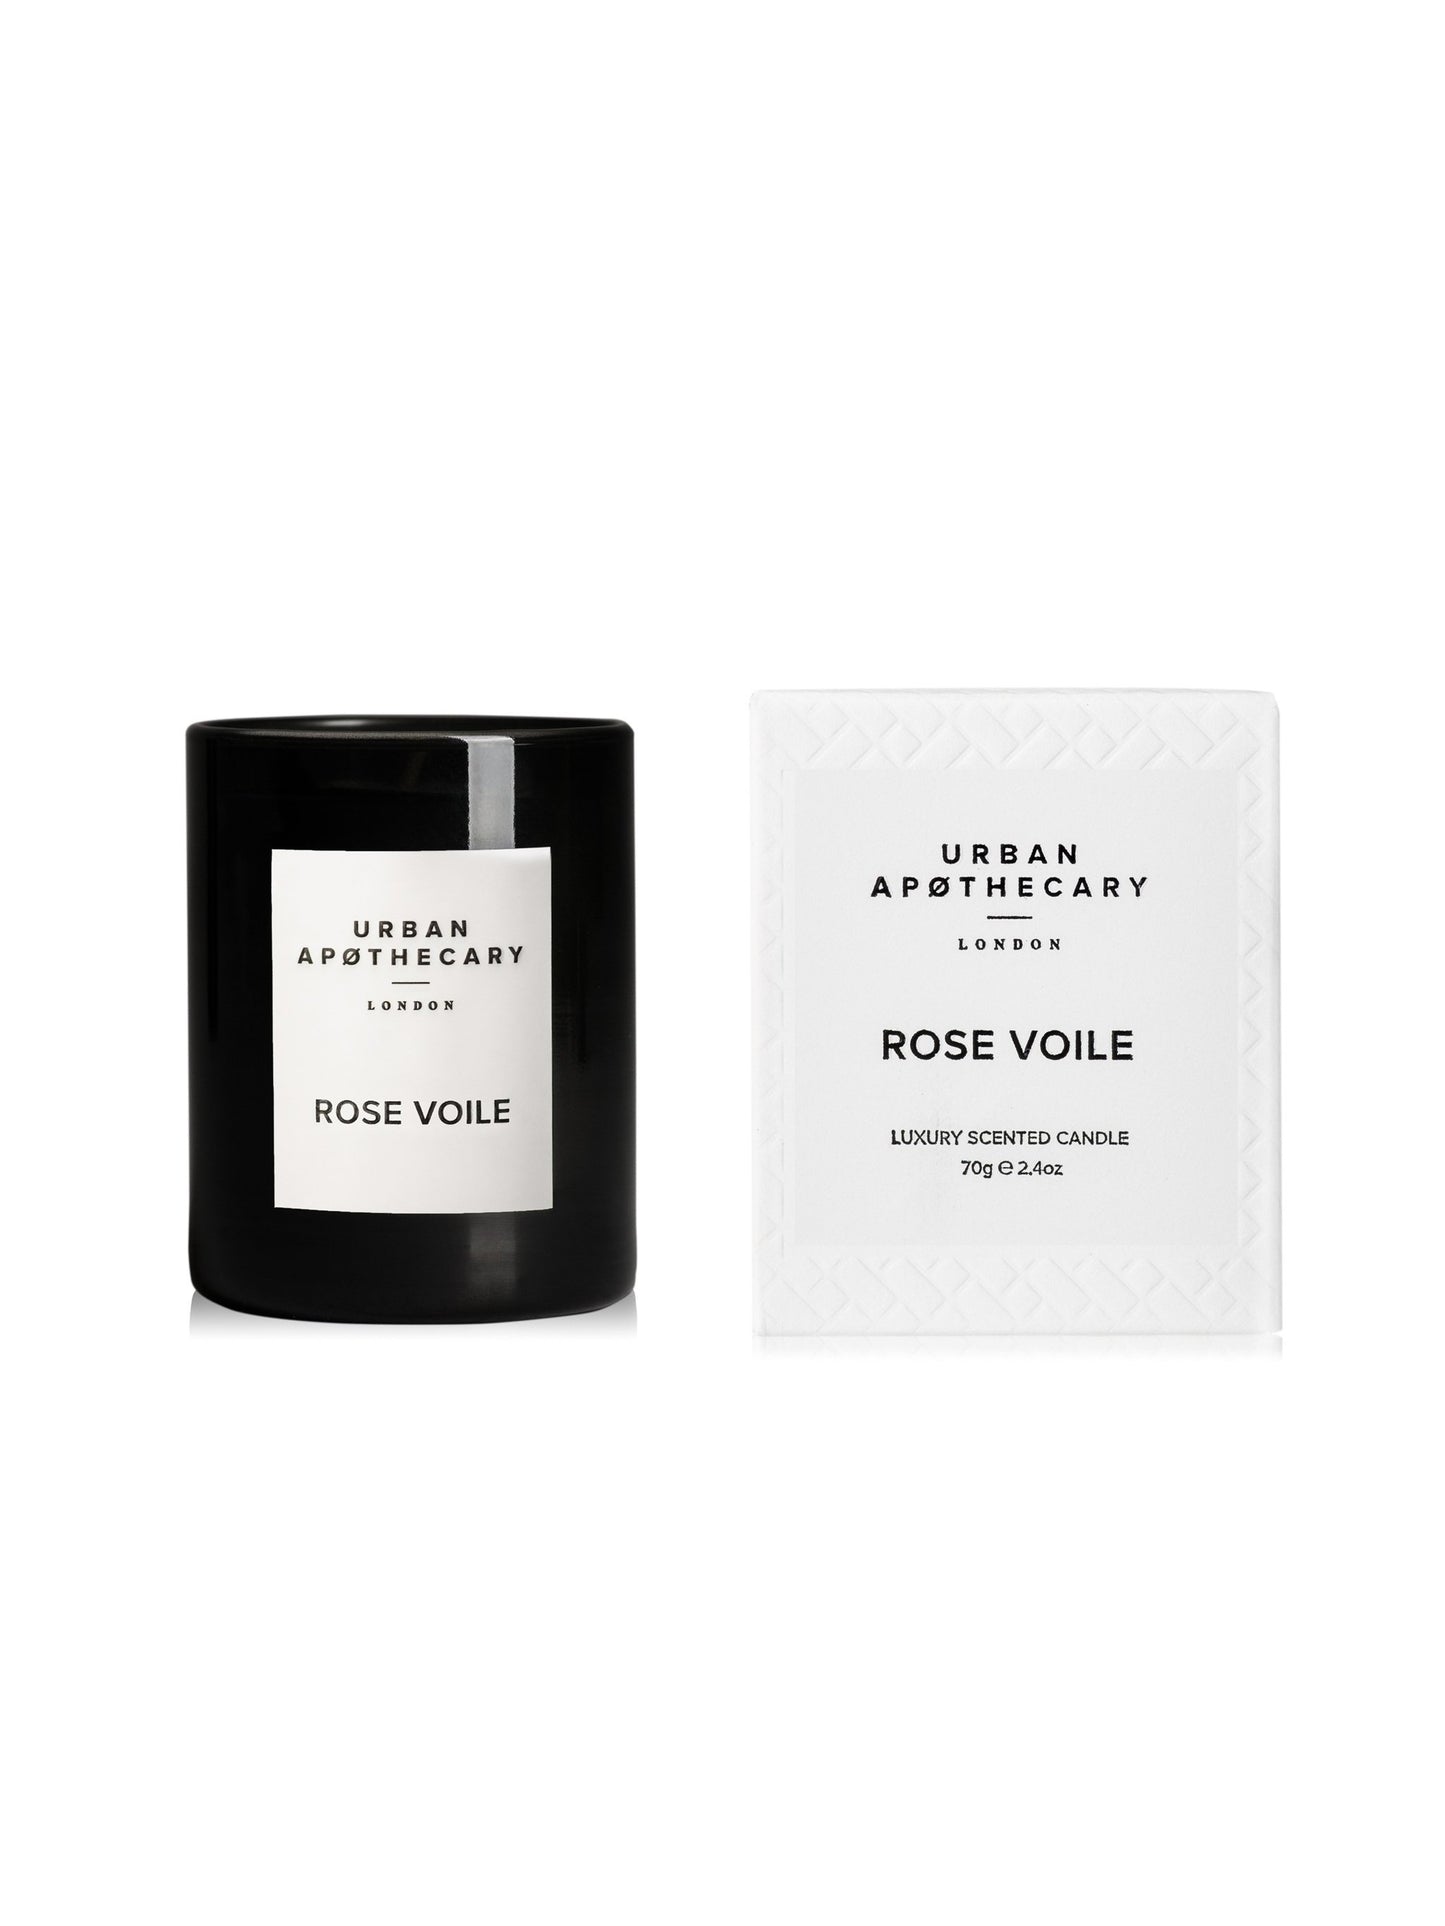 Urban Apothecary London Luxury Rose Voile Mini Scented Candle Weston Table